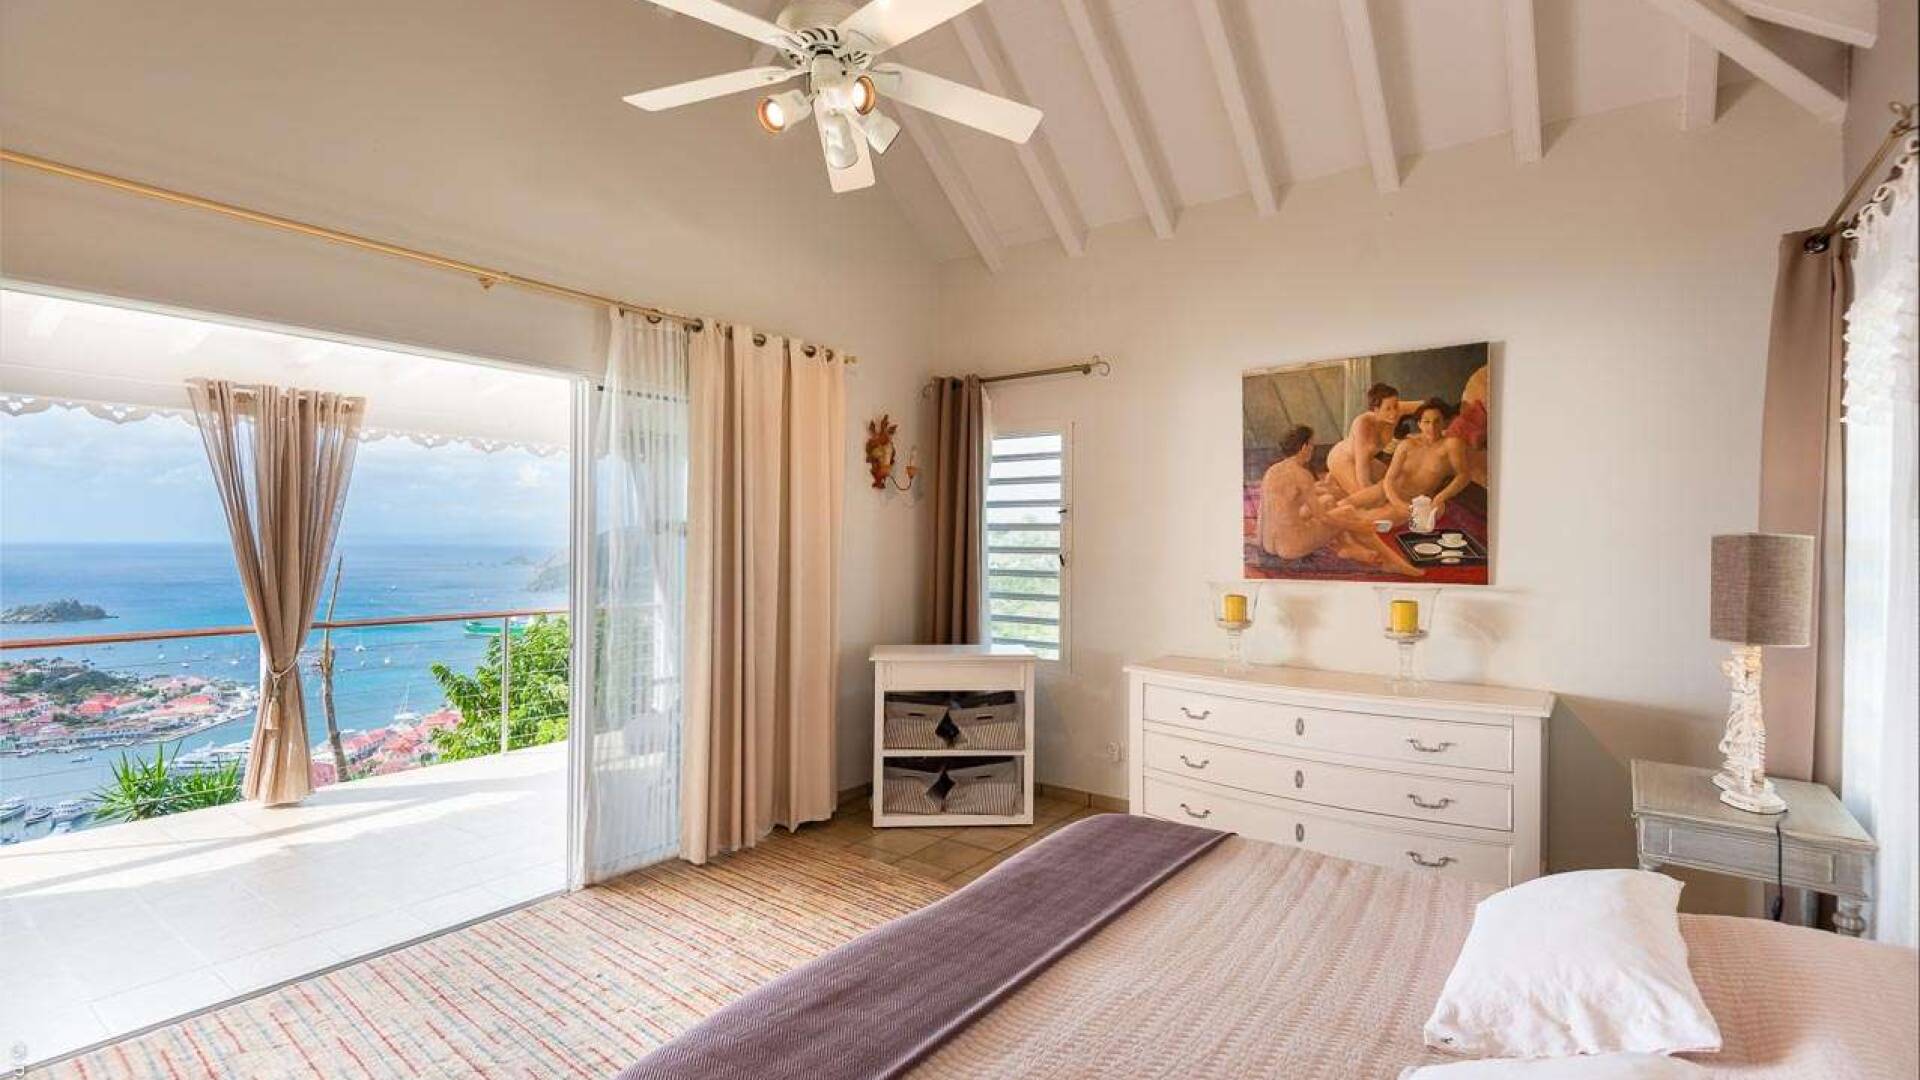 Bedroom at WV MOU, Lurin, St. Barthelemy